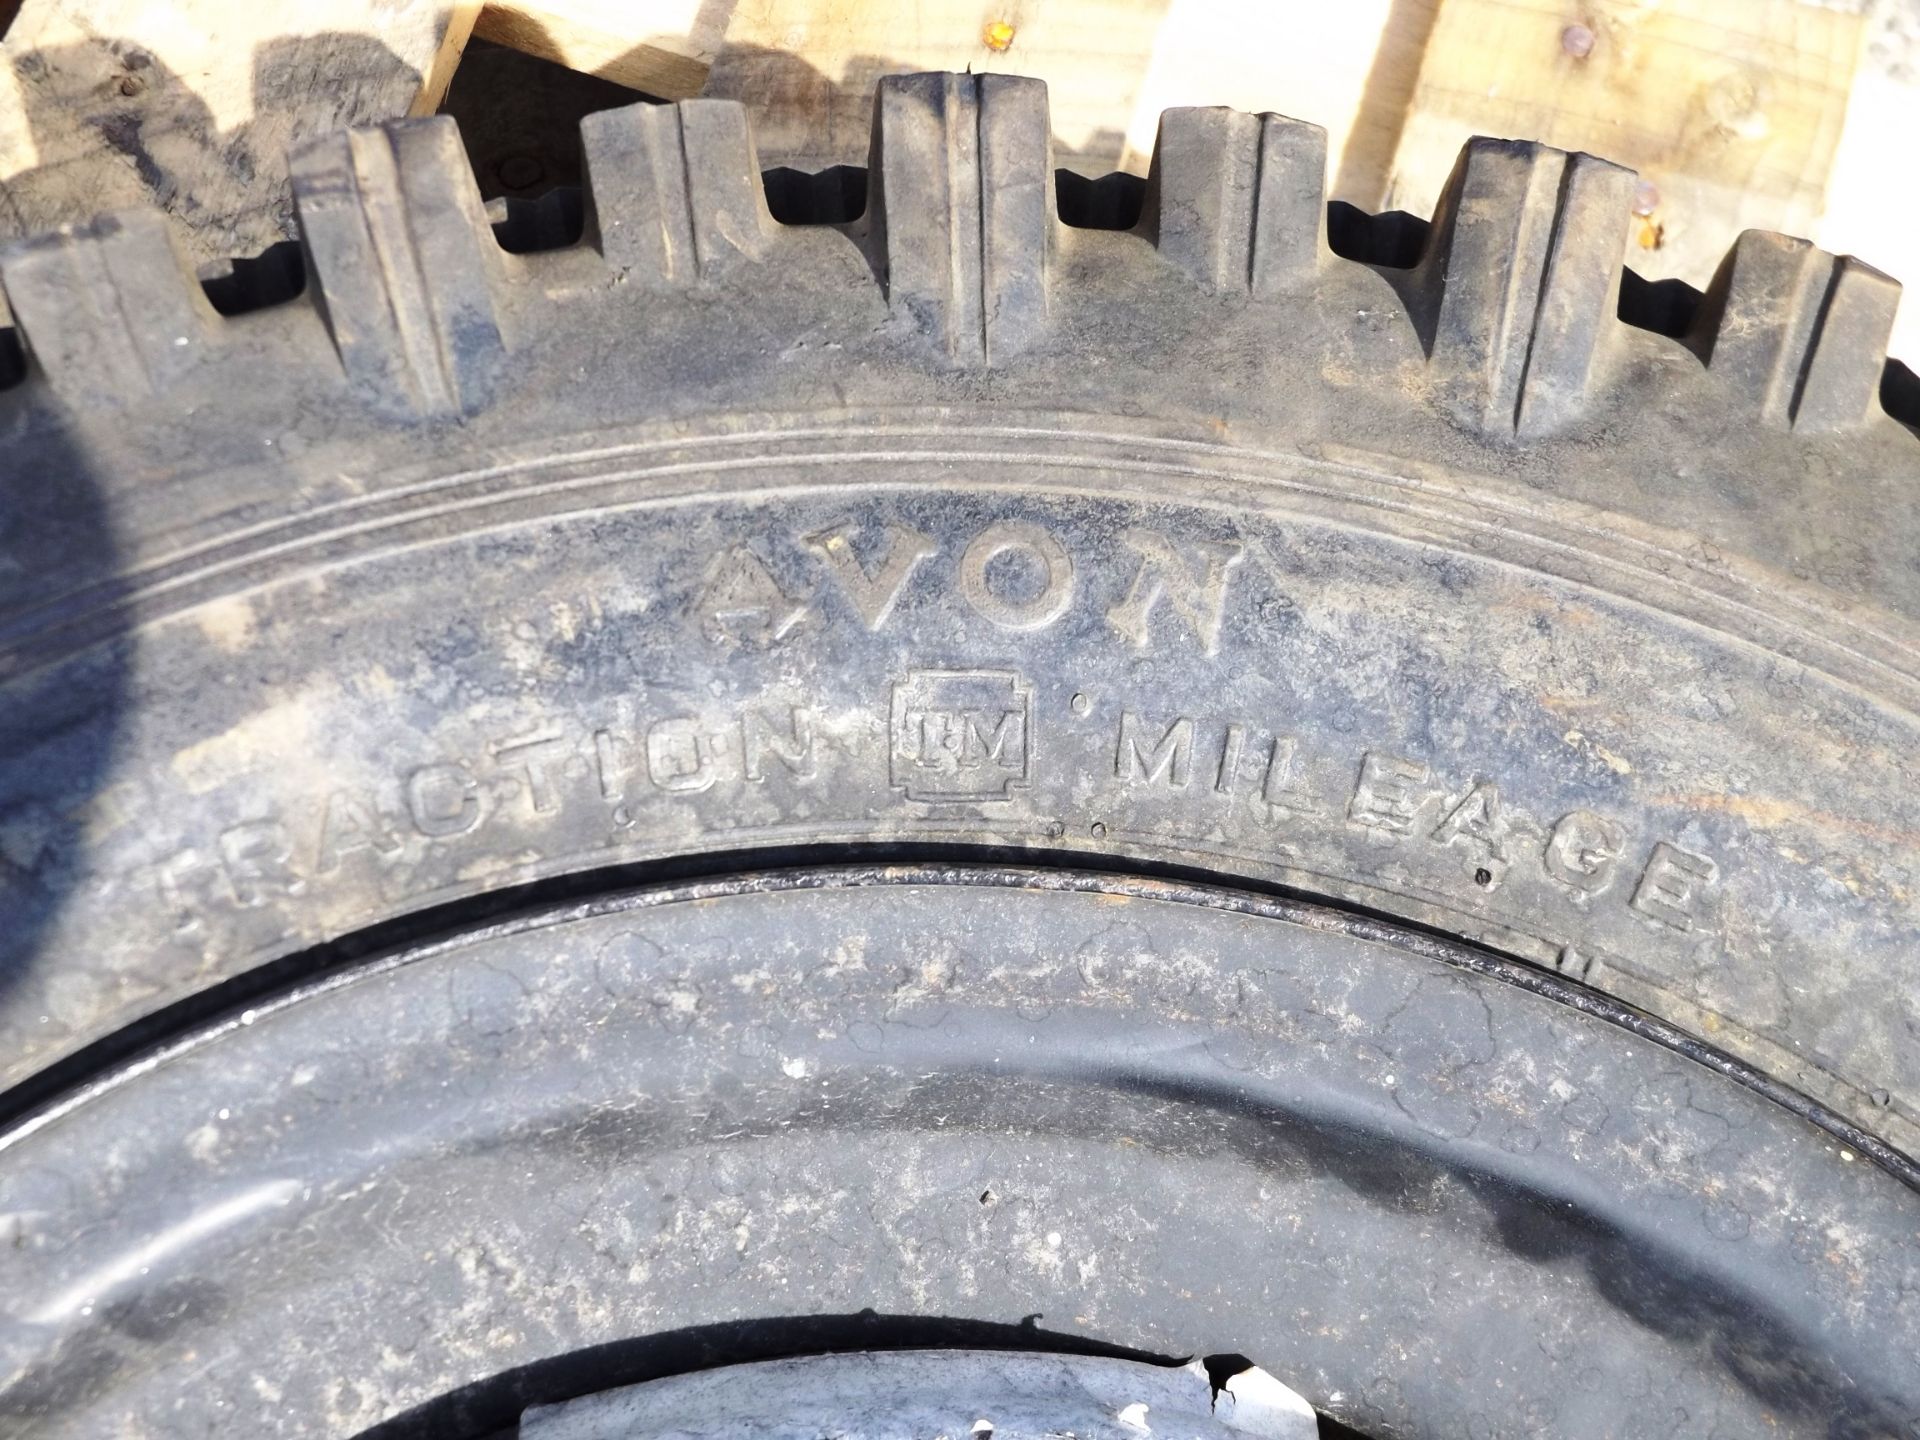 The Holy Grail of Tyres, 1 x Avon Traction Mileage 6.50 x 16 8 Ply Tyre complete with 5 stud rim - Image 2 of 5